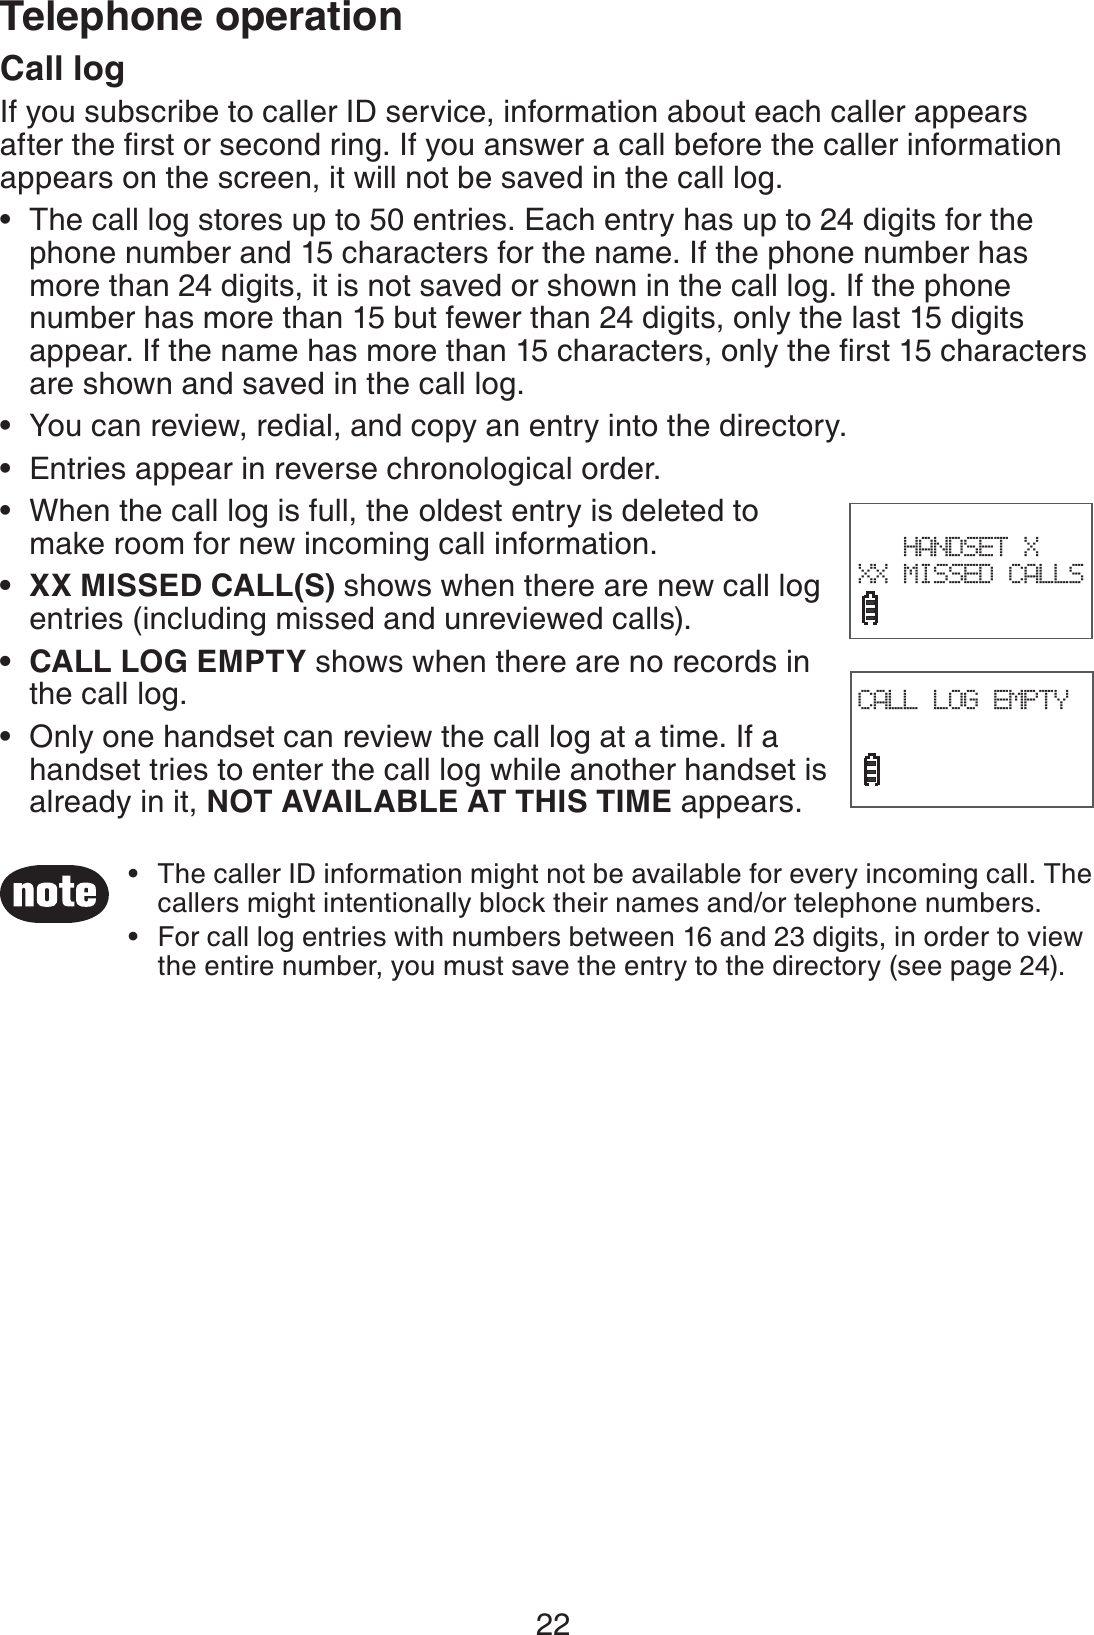 22Telephone operationCall logIf you subscribe to caller ID service, information about each caller appears after the ﬁrst or second ring. If you answer a call before the caller information appears on the screen, it will not be saved in the call log.The call log stores up to 50 entries. Each entry has up to 24 digits for the phone number and 15 characters for the name. If the phone number has more than 24 digits, it is not saved or shown in the call log. If the phone number has more than 15 but fewer than 24 digits, only the last 15 digits appear. If the name has more than 15 characters, only the ﬁrst 15 characters are shown and saved in the call log.You can review, redial, and copy an entry into the directory.Entries appear in reverse chronological order.When the call log is full, the oldest entry is deleted to make room for new incoming call information.XX MISSED CALL(S) shows when there are new call log entries (including missed and unreviewed calls).CALL LOG EMPTY shows when there are no records in the call log.Only one handset can review the call log at a time. If a handset tries to enter the call log while another handset is already in it, NOT AVAILABLE AT THIS TIME appears.•••••••The caller ID information might not be available for every incoming call. The callers might intentionally block their names and/or telephone numbers.For call log entries with numbers between 16 and 23 digits, in order to view the entire number, you must save the entry to the directory (see page 24). ••HANDSET X XX MISSED CALLSCALL LOG EMPTY